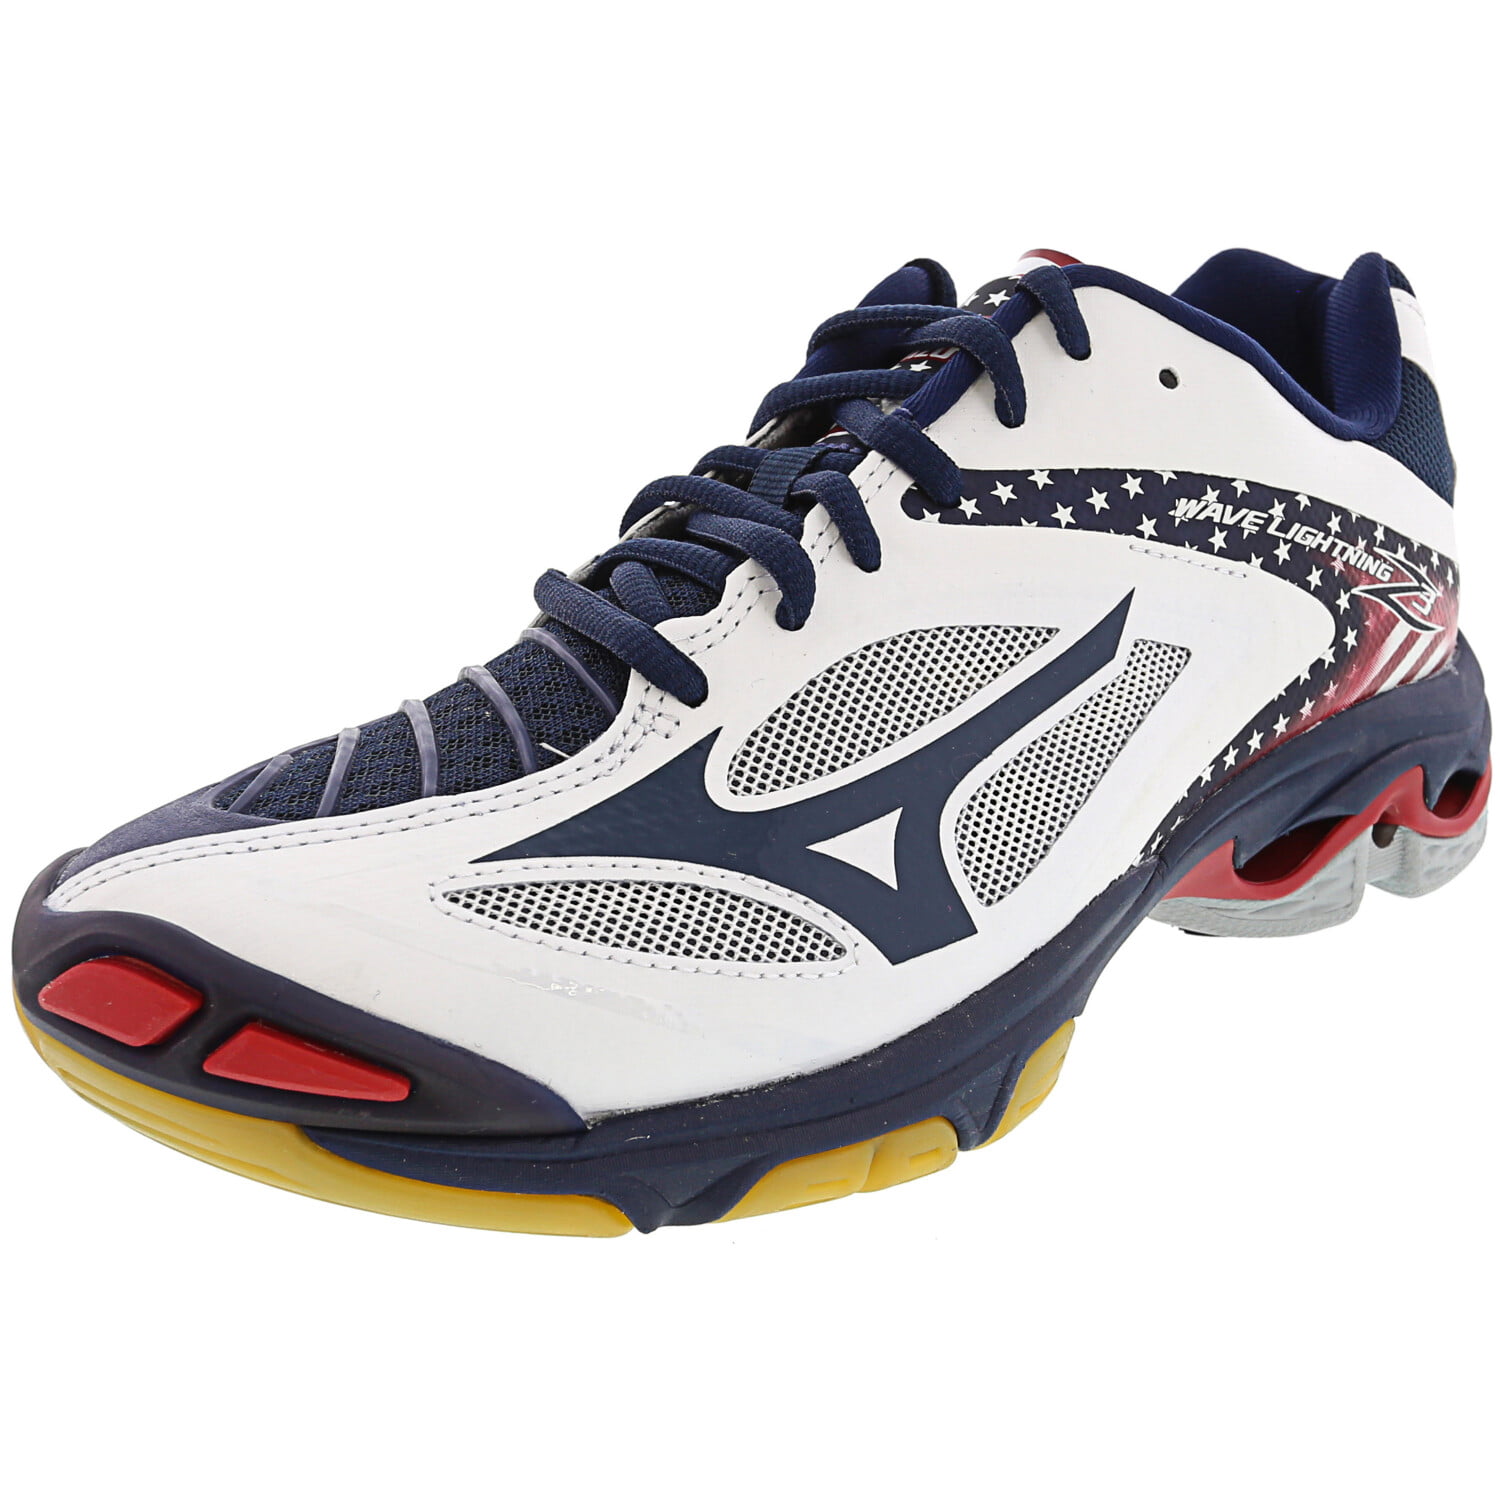 Mizuno Wave Lightning Womens Size 7.5 Volleyball White Athletic Training Shoes 